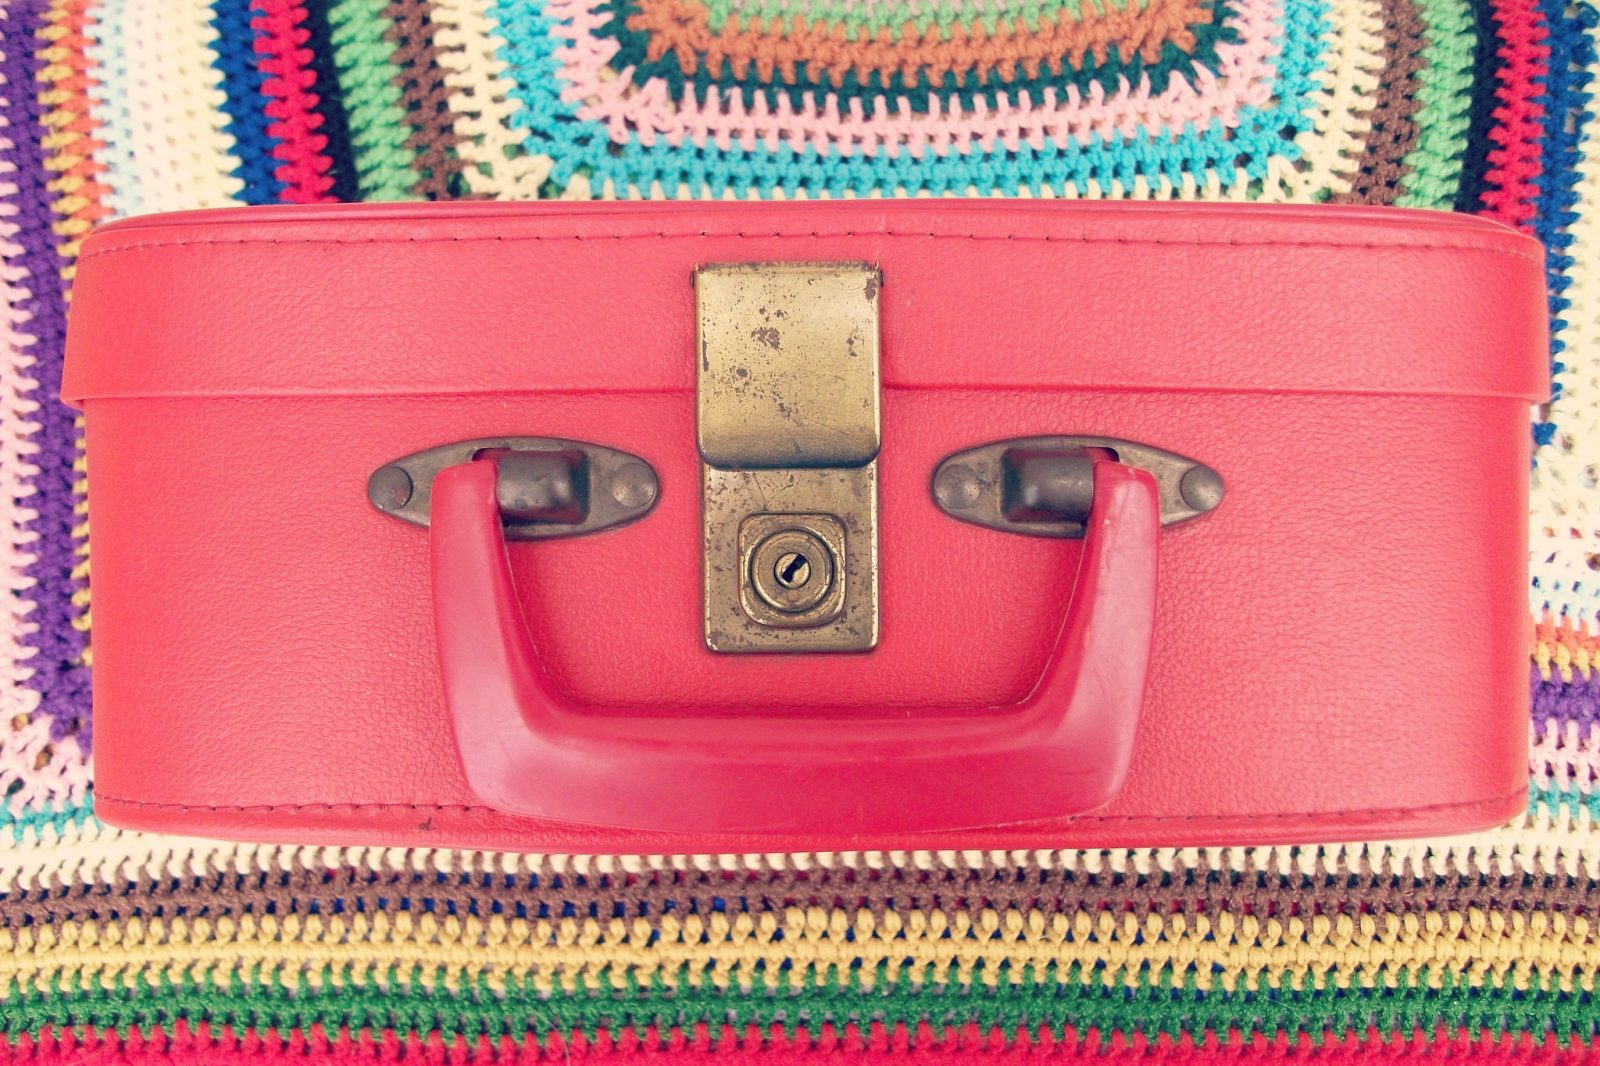 https://www.clutter.com/blog/wp-content/uploads/2016/11/15182514/small-red-suitcase-e1479252326635.jpg